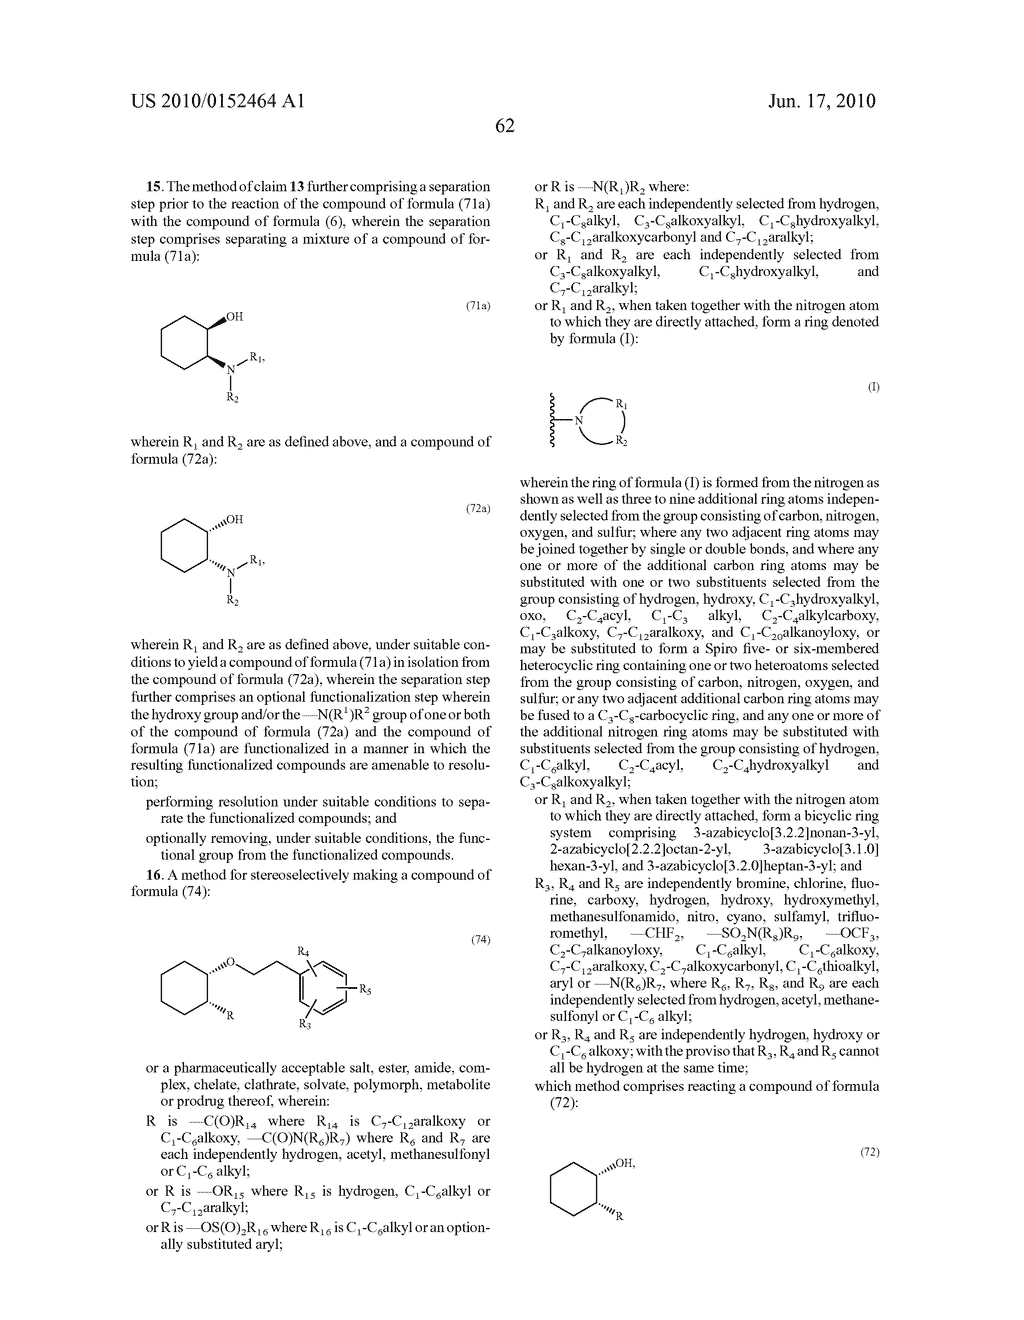 SYNTHETIC PROCESS FOR AMINOCYCLOHEXYL ETHER COMPOUNDS - diagram, schematic, and image 110